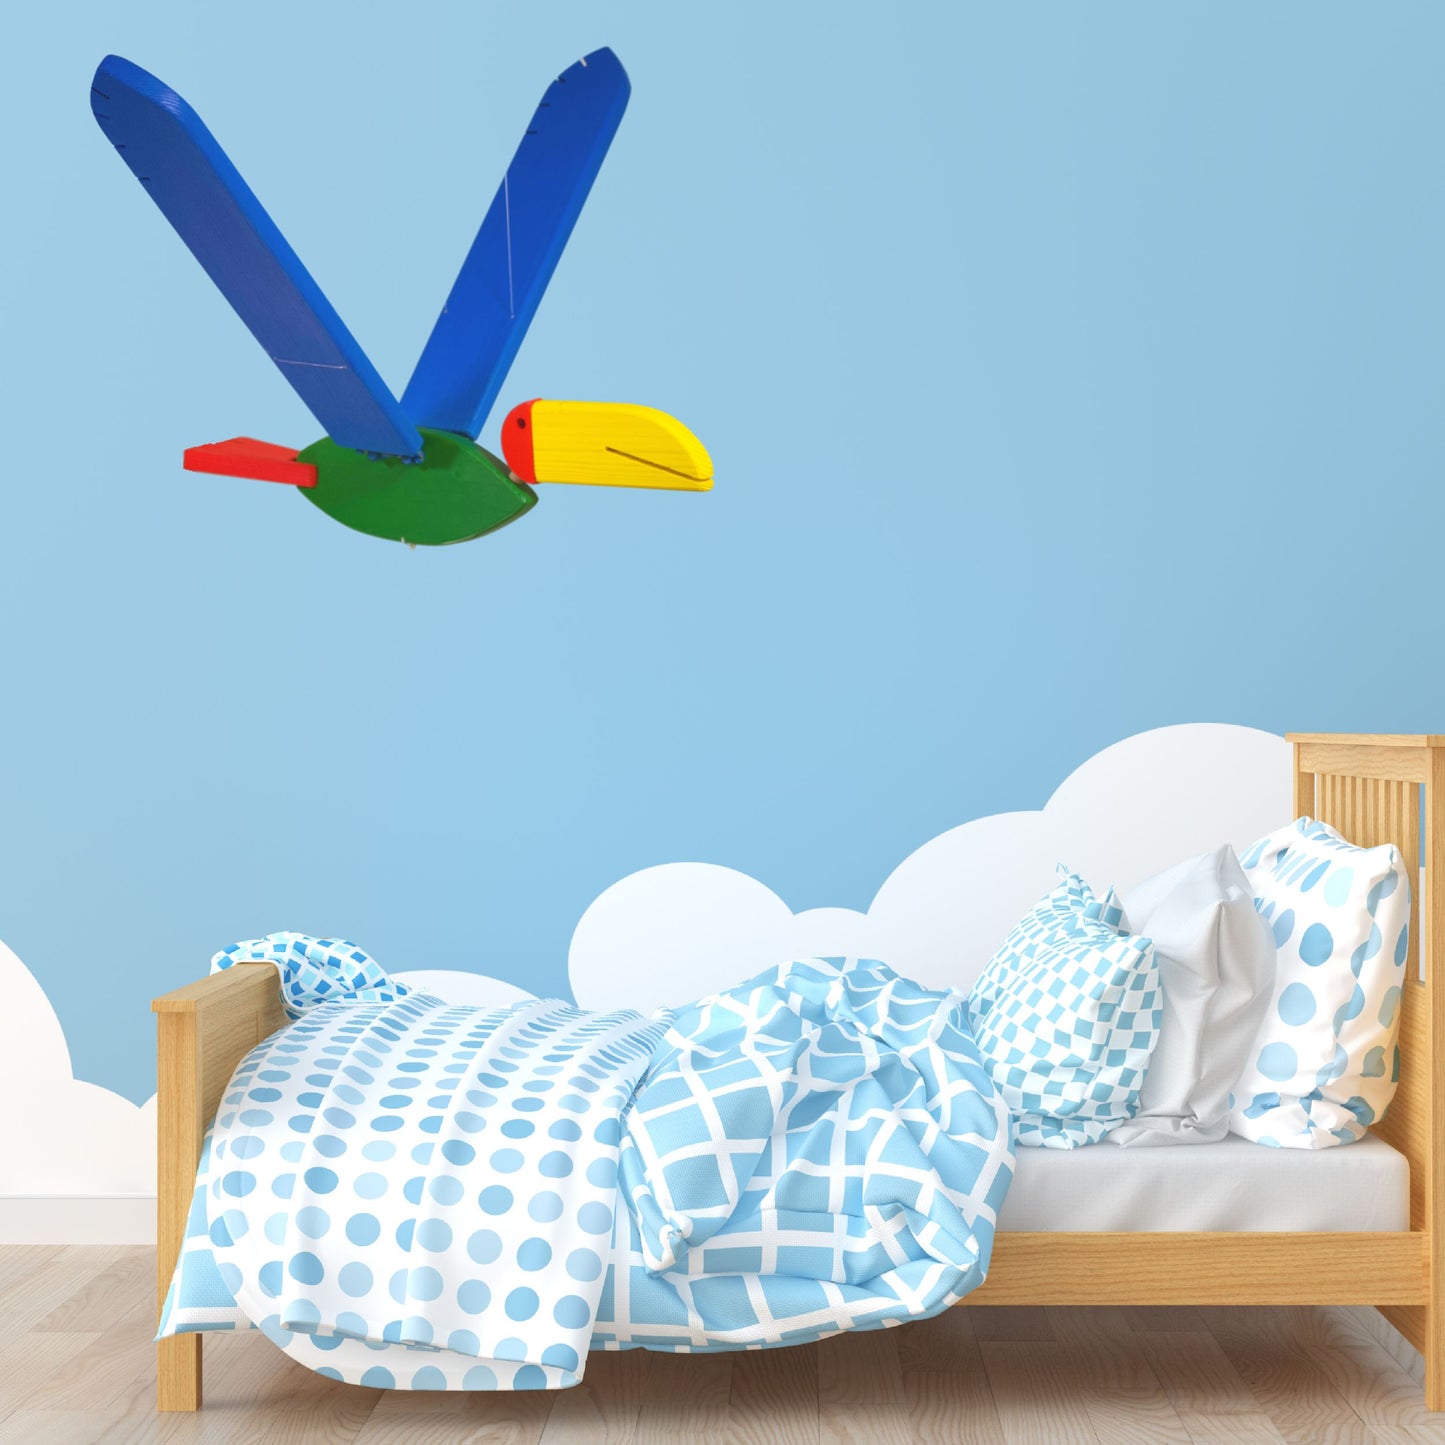 Flying Toucan Wooden Mobile - Colorful Bird Nursery Mobile - Natural Kids Room Decor